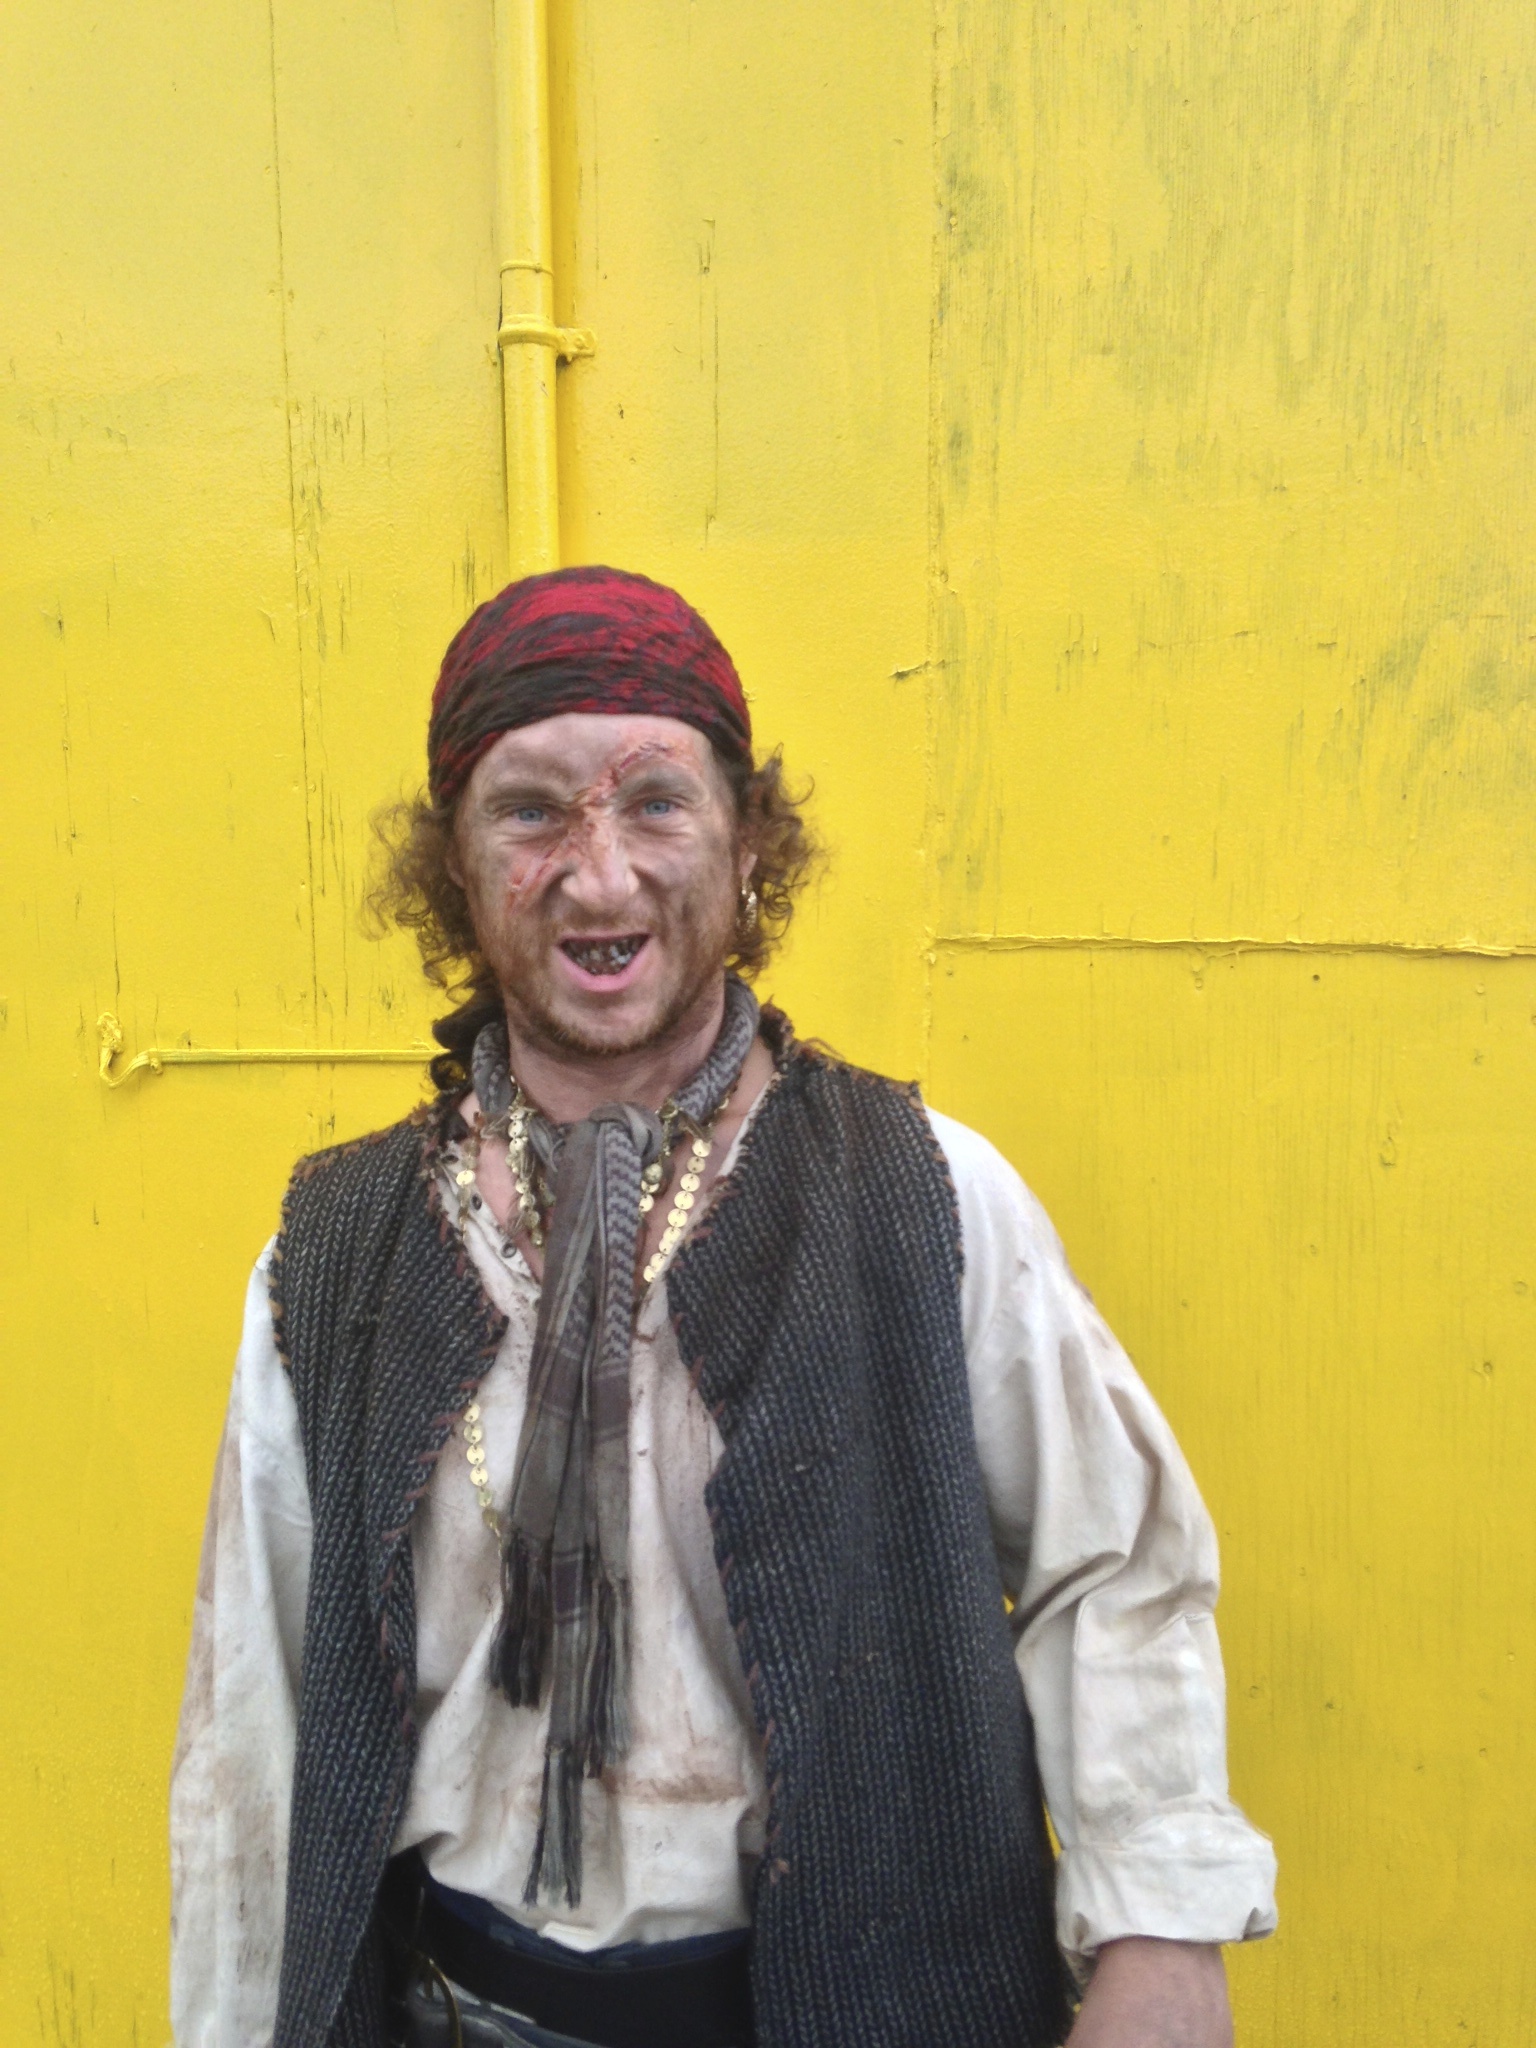 Pirate #2 (Kyle Mitchell) on the set of Beethoven's Treasure Tail - 2013.